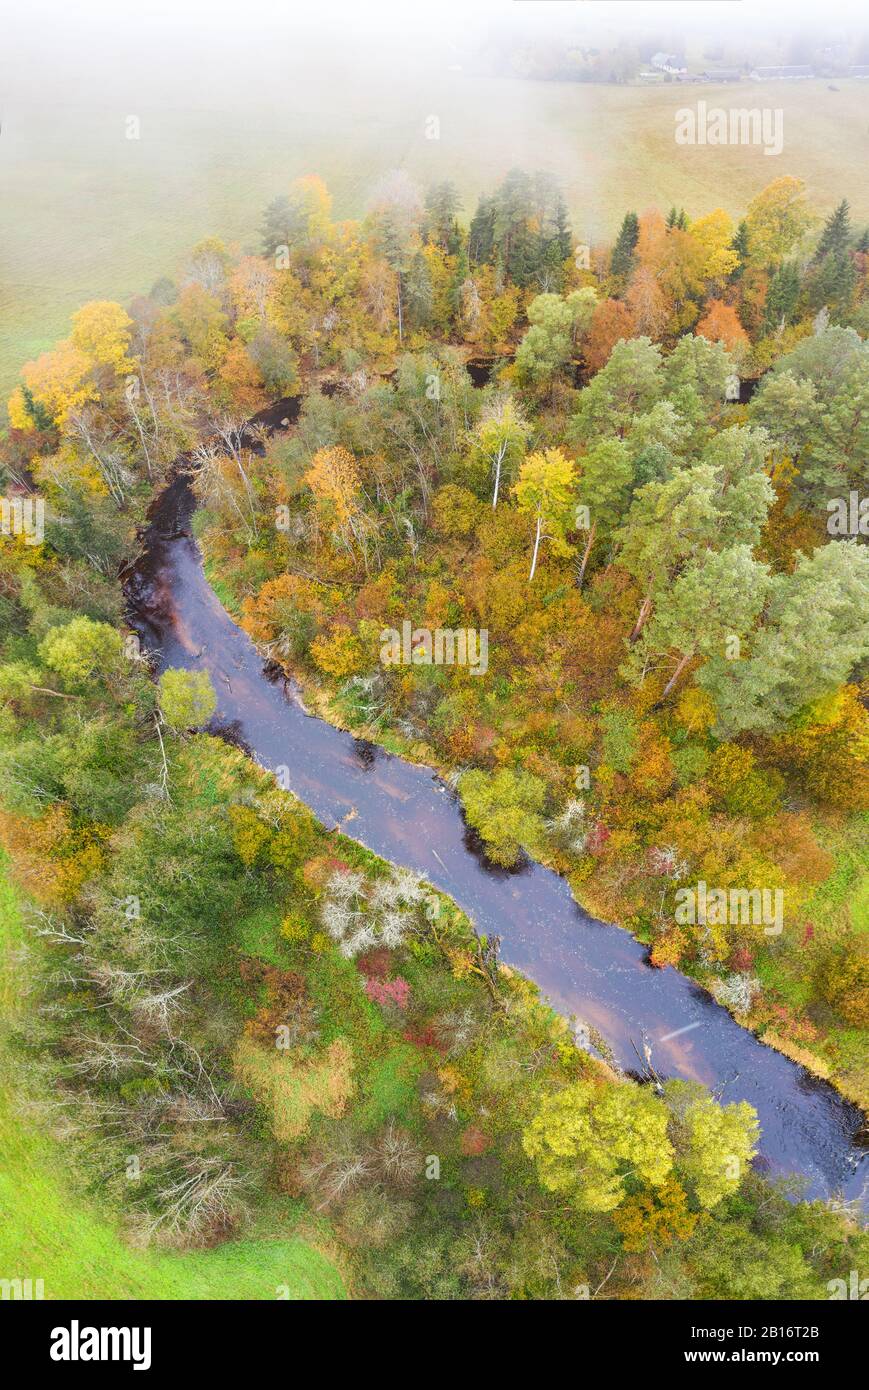 Forest in autumn colors. Colored trees and a meandering blue river. Red, yellow, orange, green deciduous trees in fall. Peetri river, Estonia, Europe Stock Photo